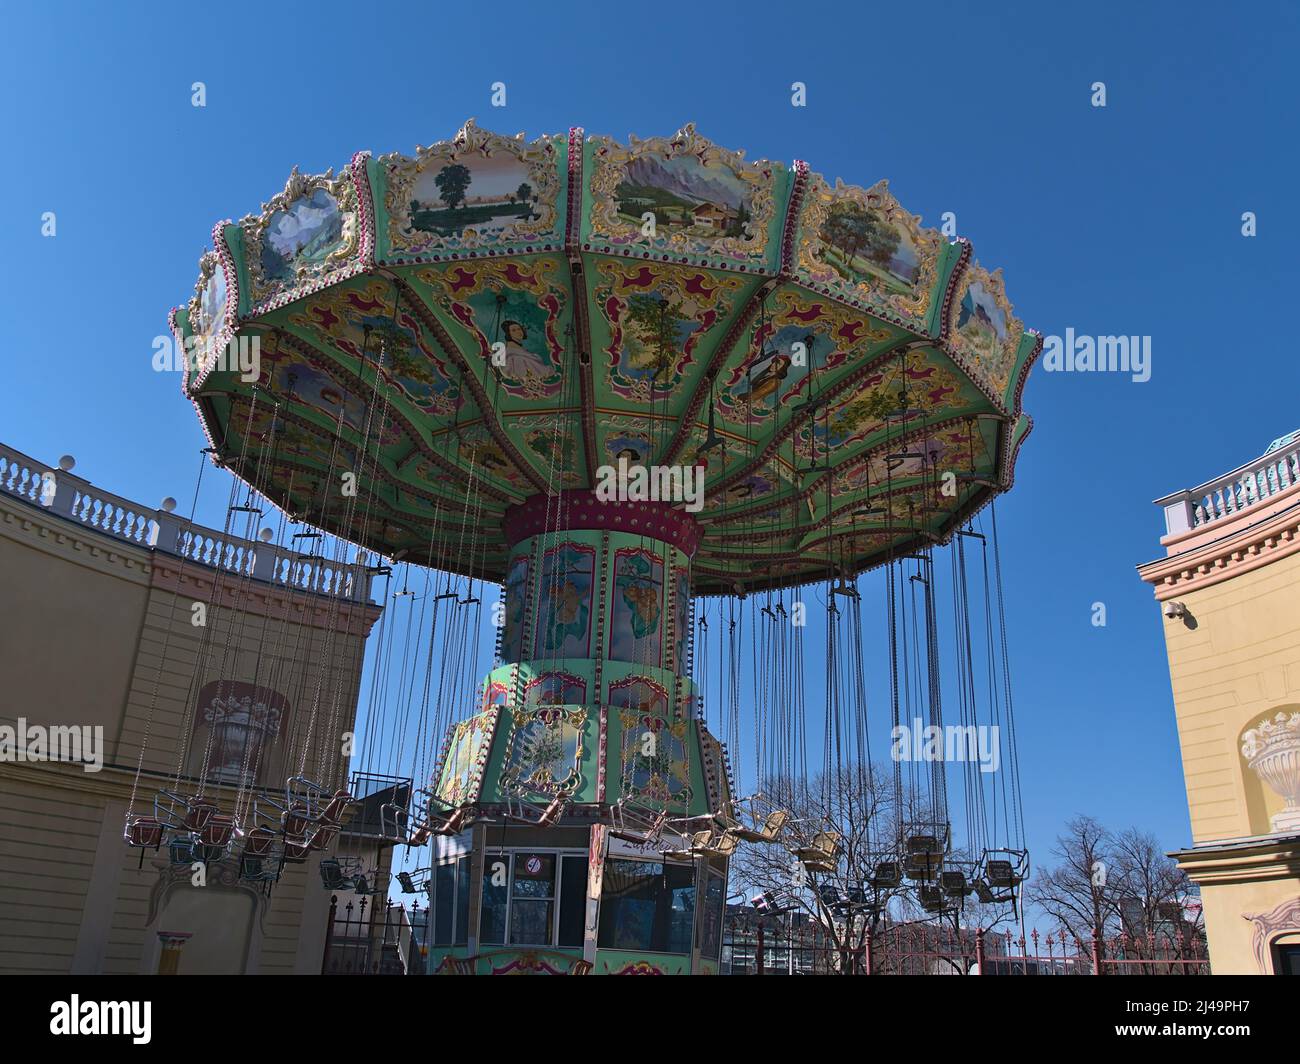 View of traditional carousel ride in amusement park Wurstelprater near Wiener Prater in Vienna, Austria on sunny day in spring season. Stock Photo